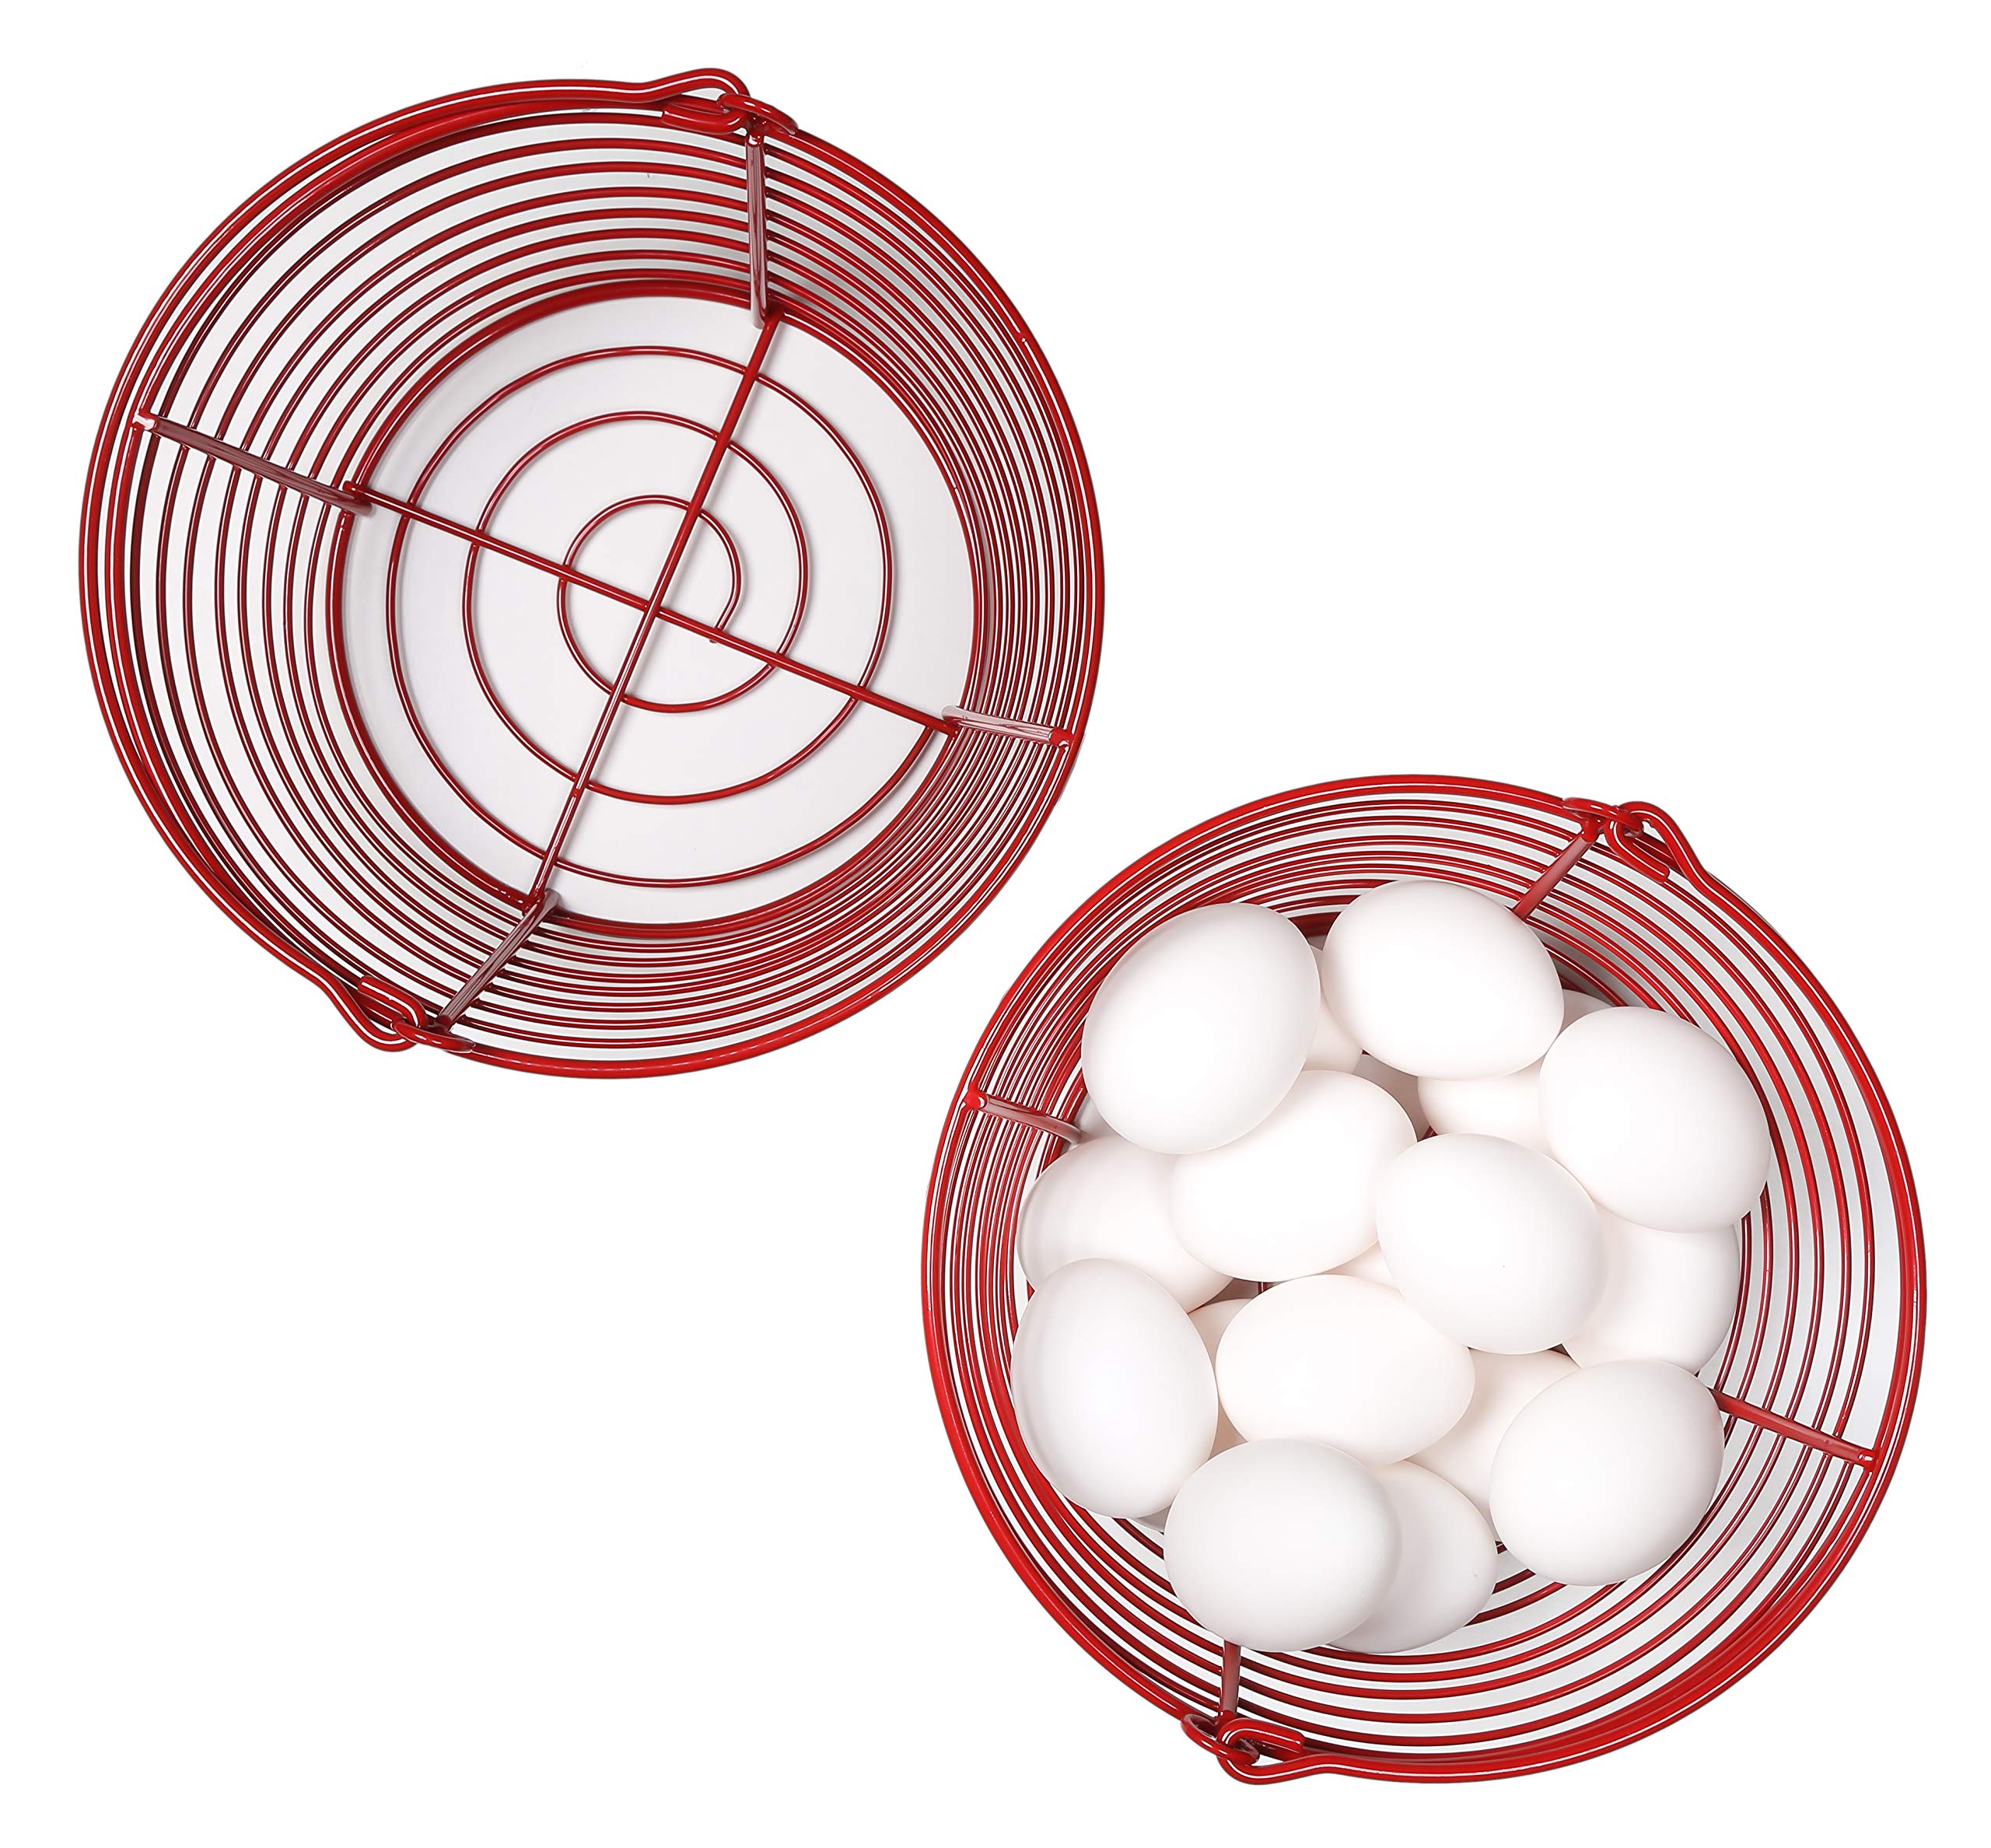 CONCORD 8" Egg Basket For Storage Collecting and Transporting Chicken and Duck Eggs. Farm Grade Wire Baskets. 2 Pack (Red)